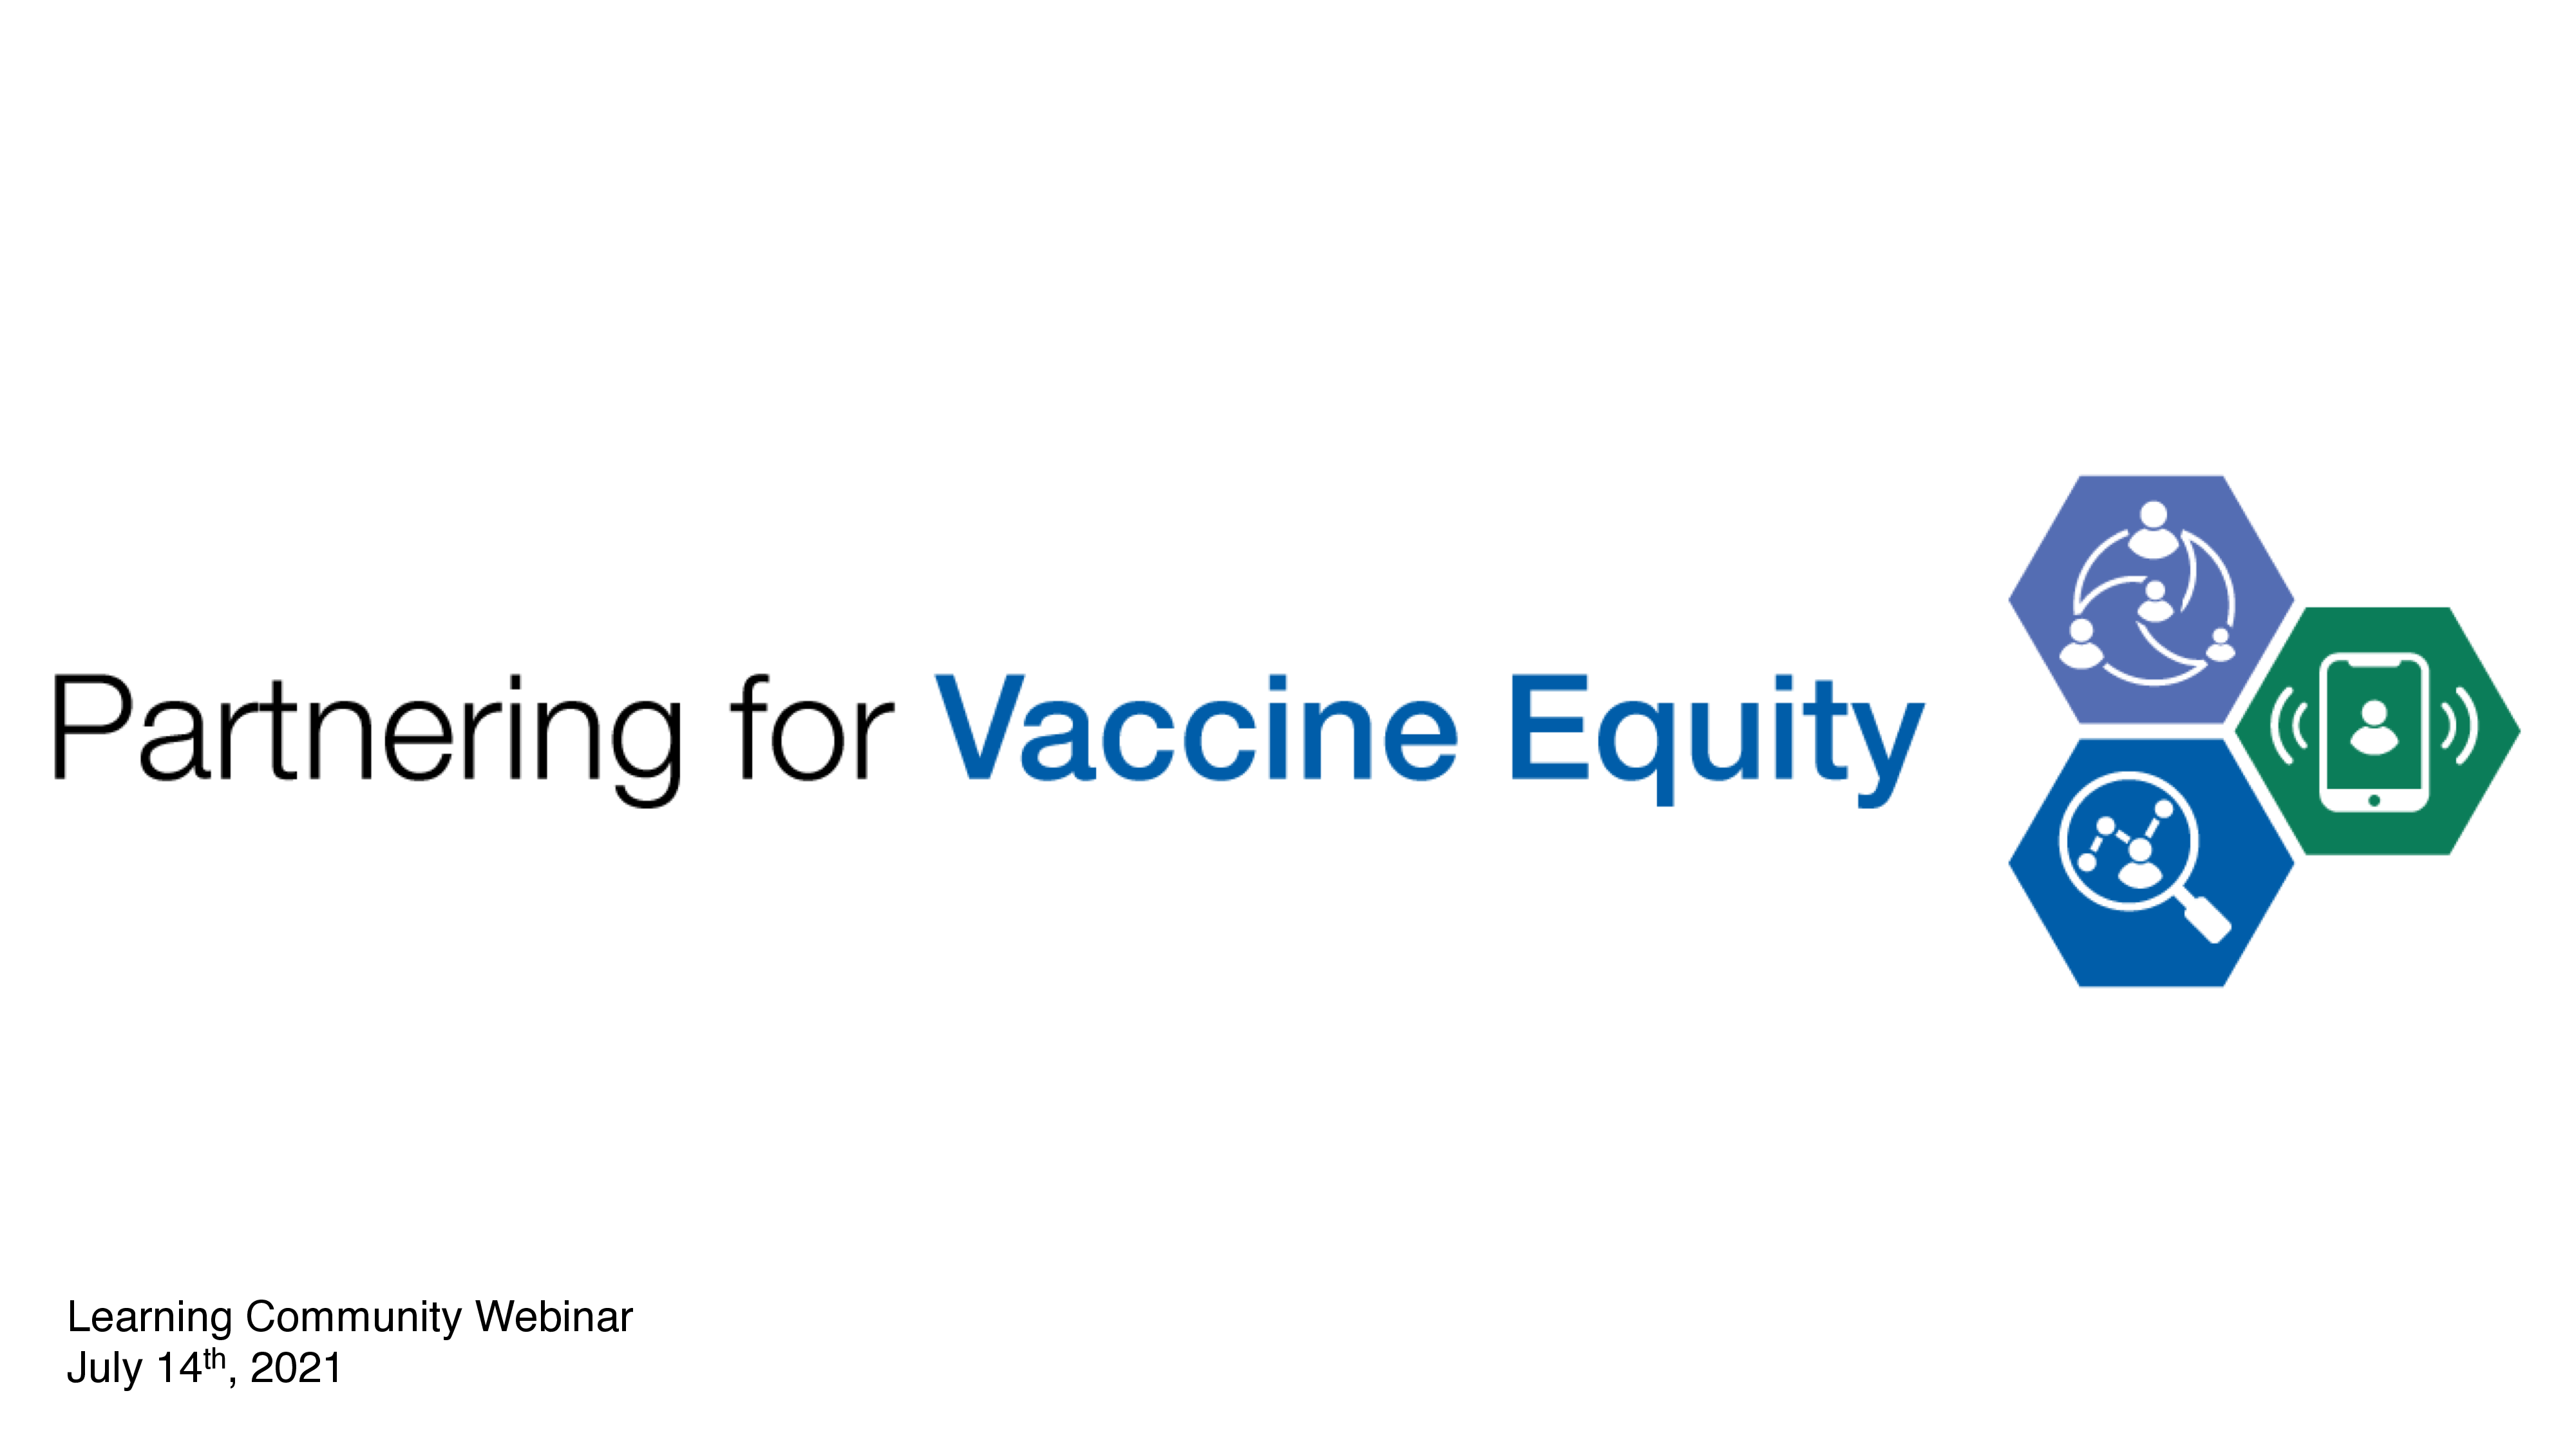 The title slide of a PowerPoint presentation has the words "Partnering for Vaccine Equity" 